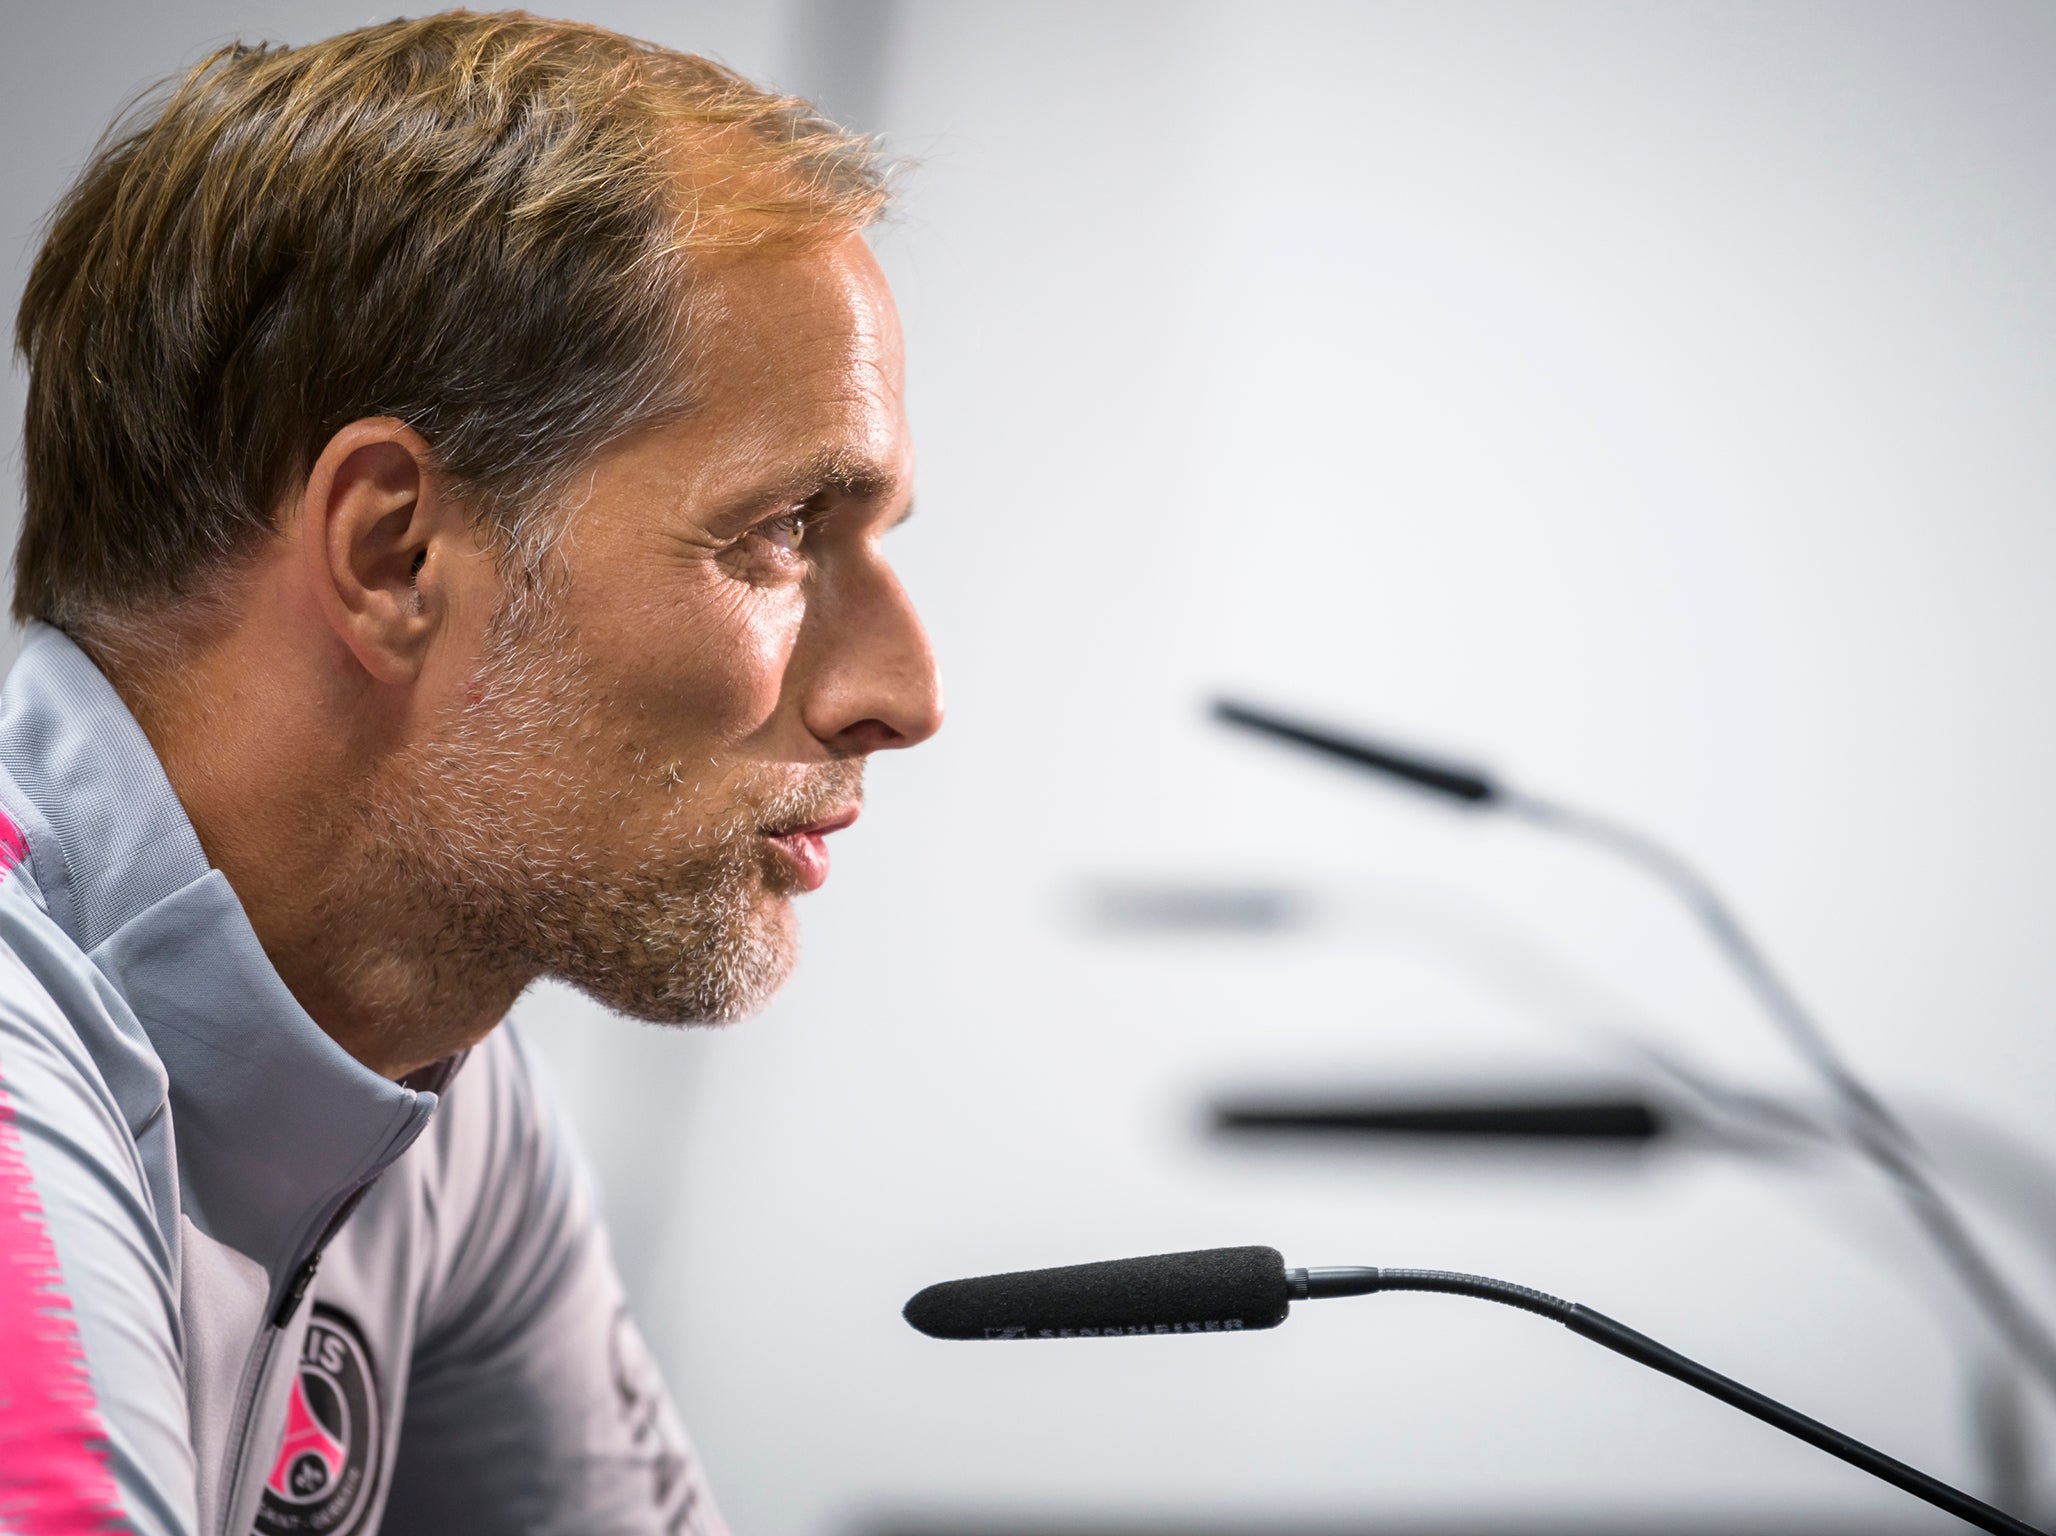 Wenger left Arsenal at the end of last season following nearly 22 years in charge of the Gunners, with Tuchel rumoured to be on the club's list of targets